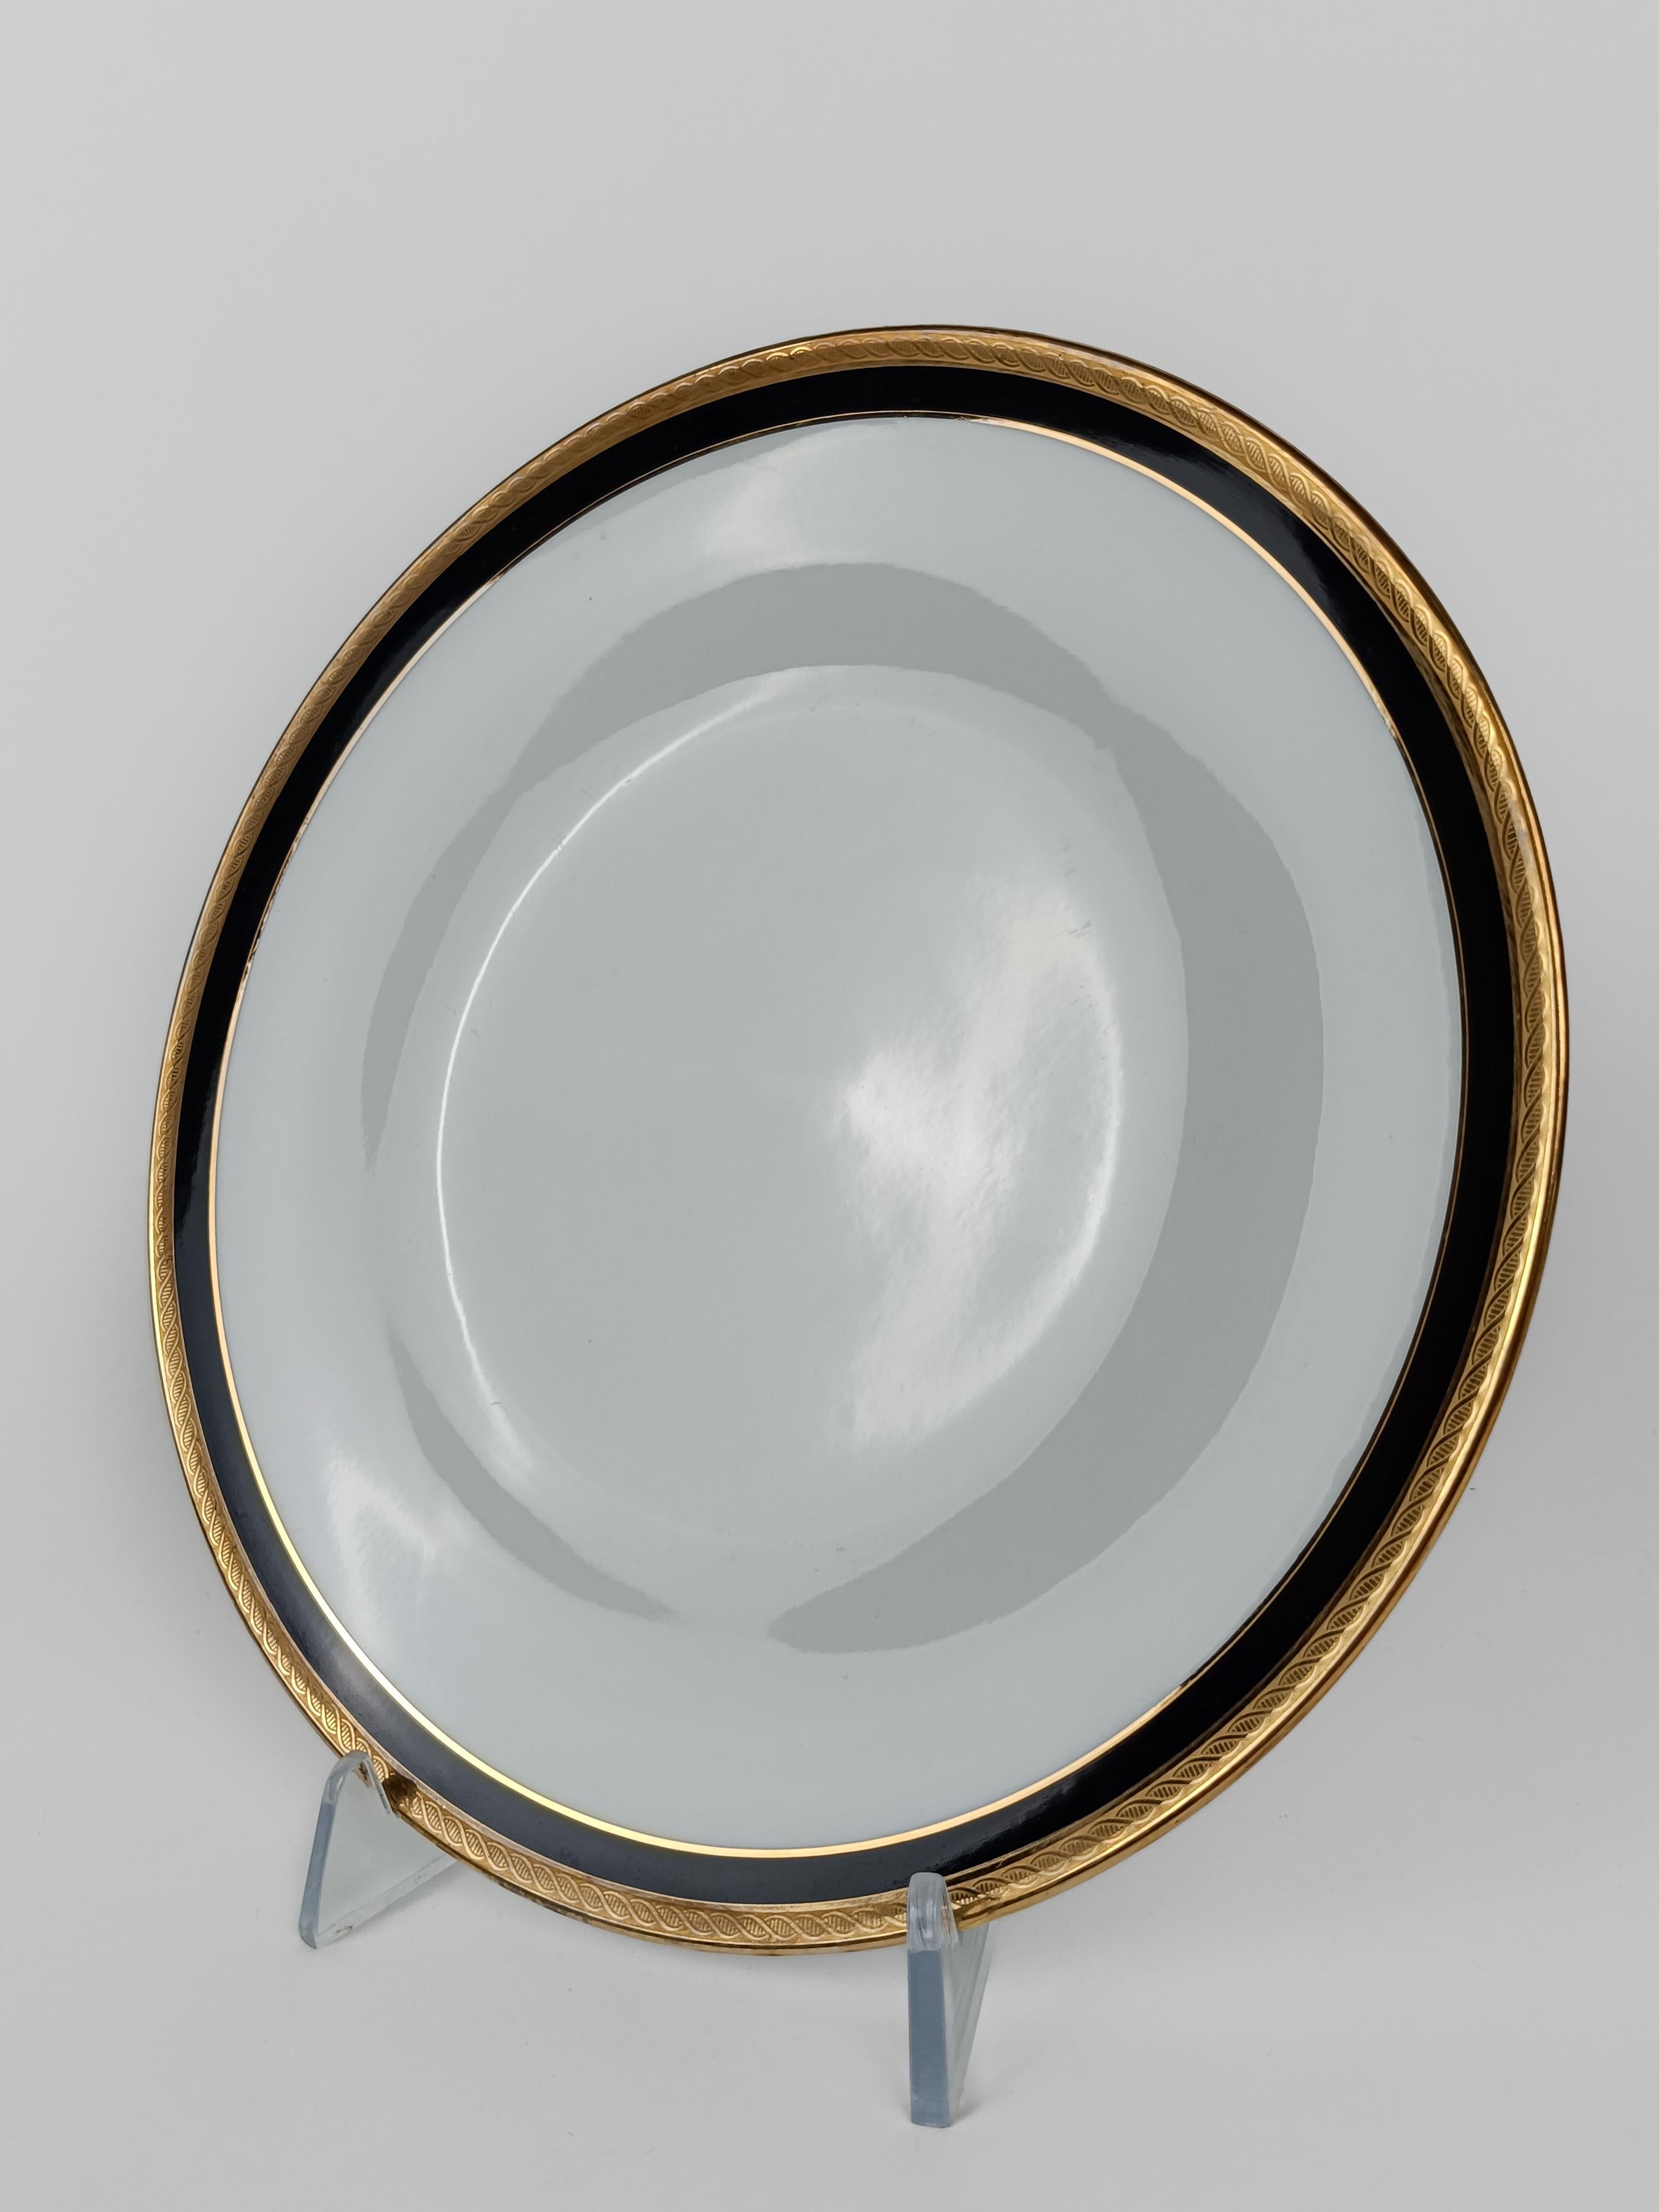 China Dinner Service for 6 by Richard Ginori Black Onice Rim, Gold Trim & Verge For Sale 2